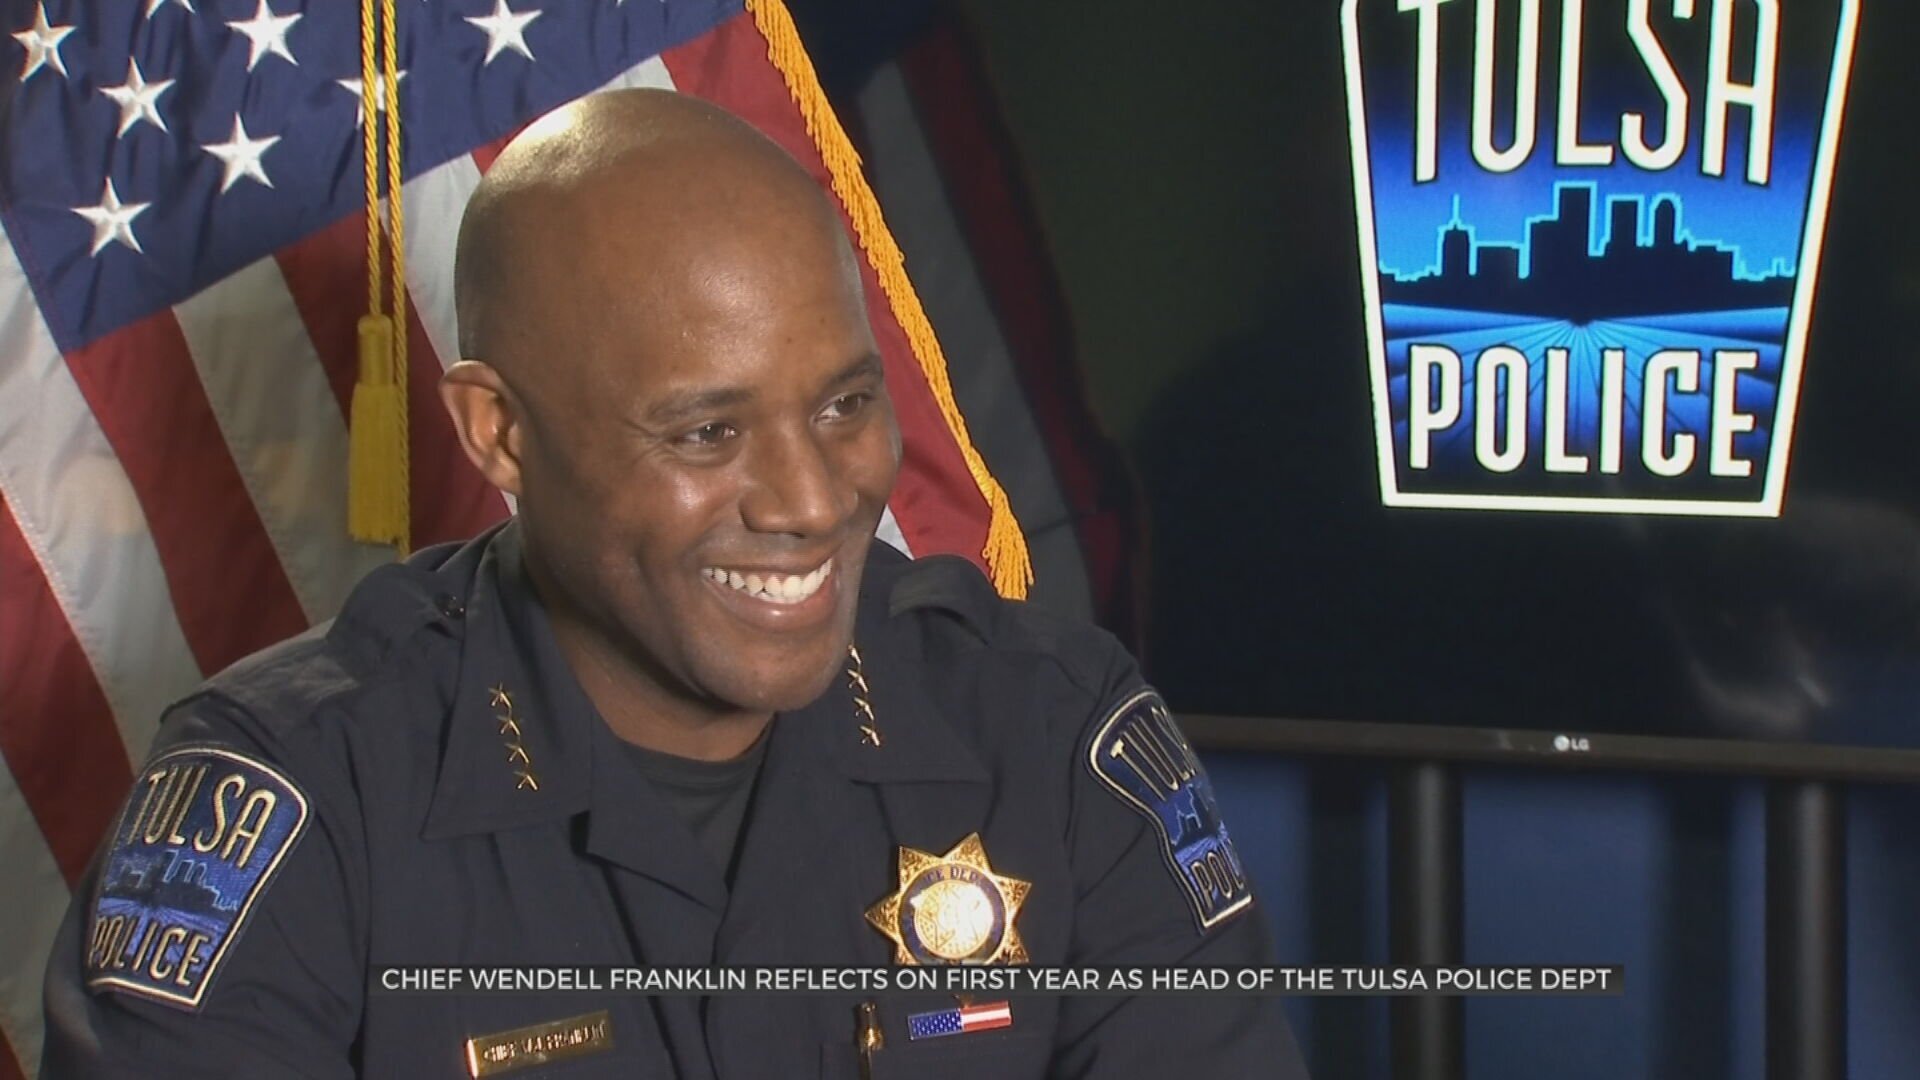 Chief Franklin Reflects On 1st Year As Head Of Tulsa Police Department